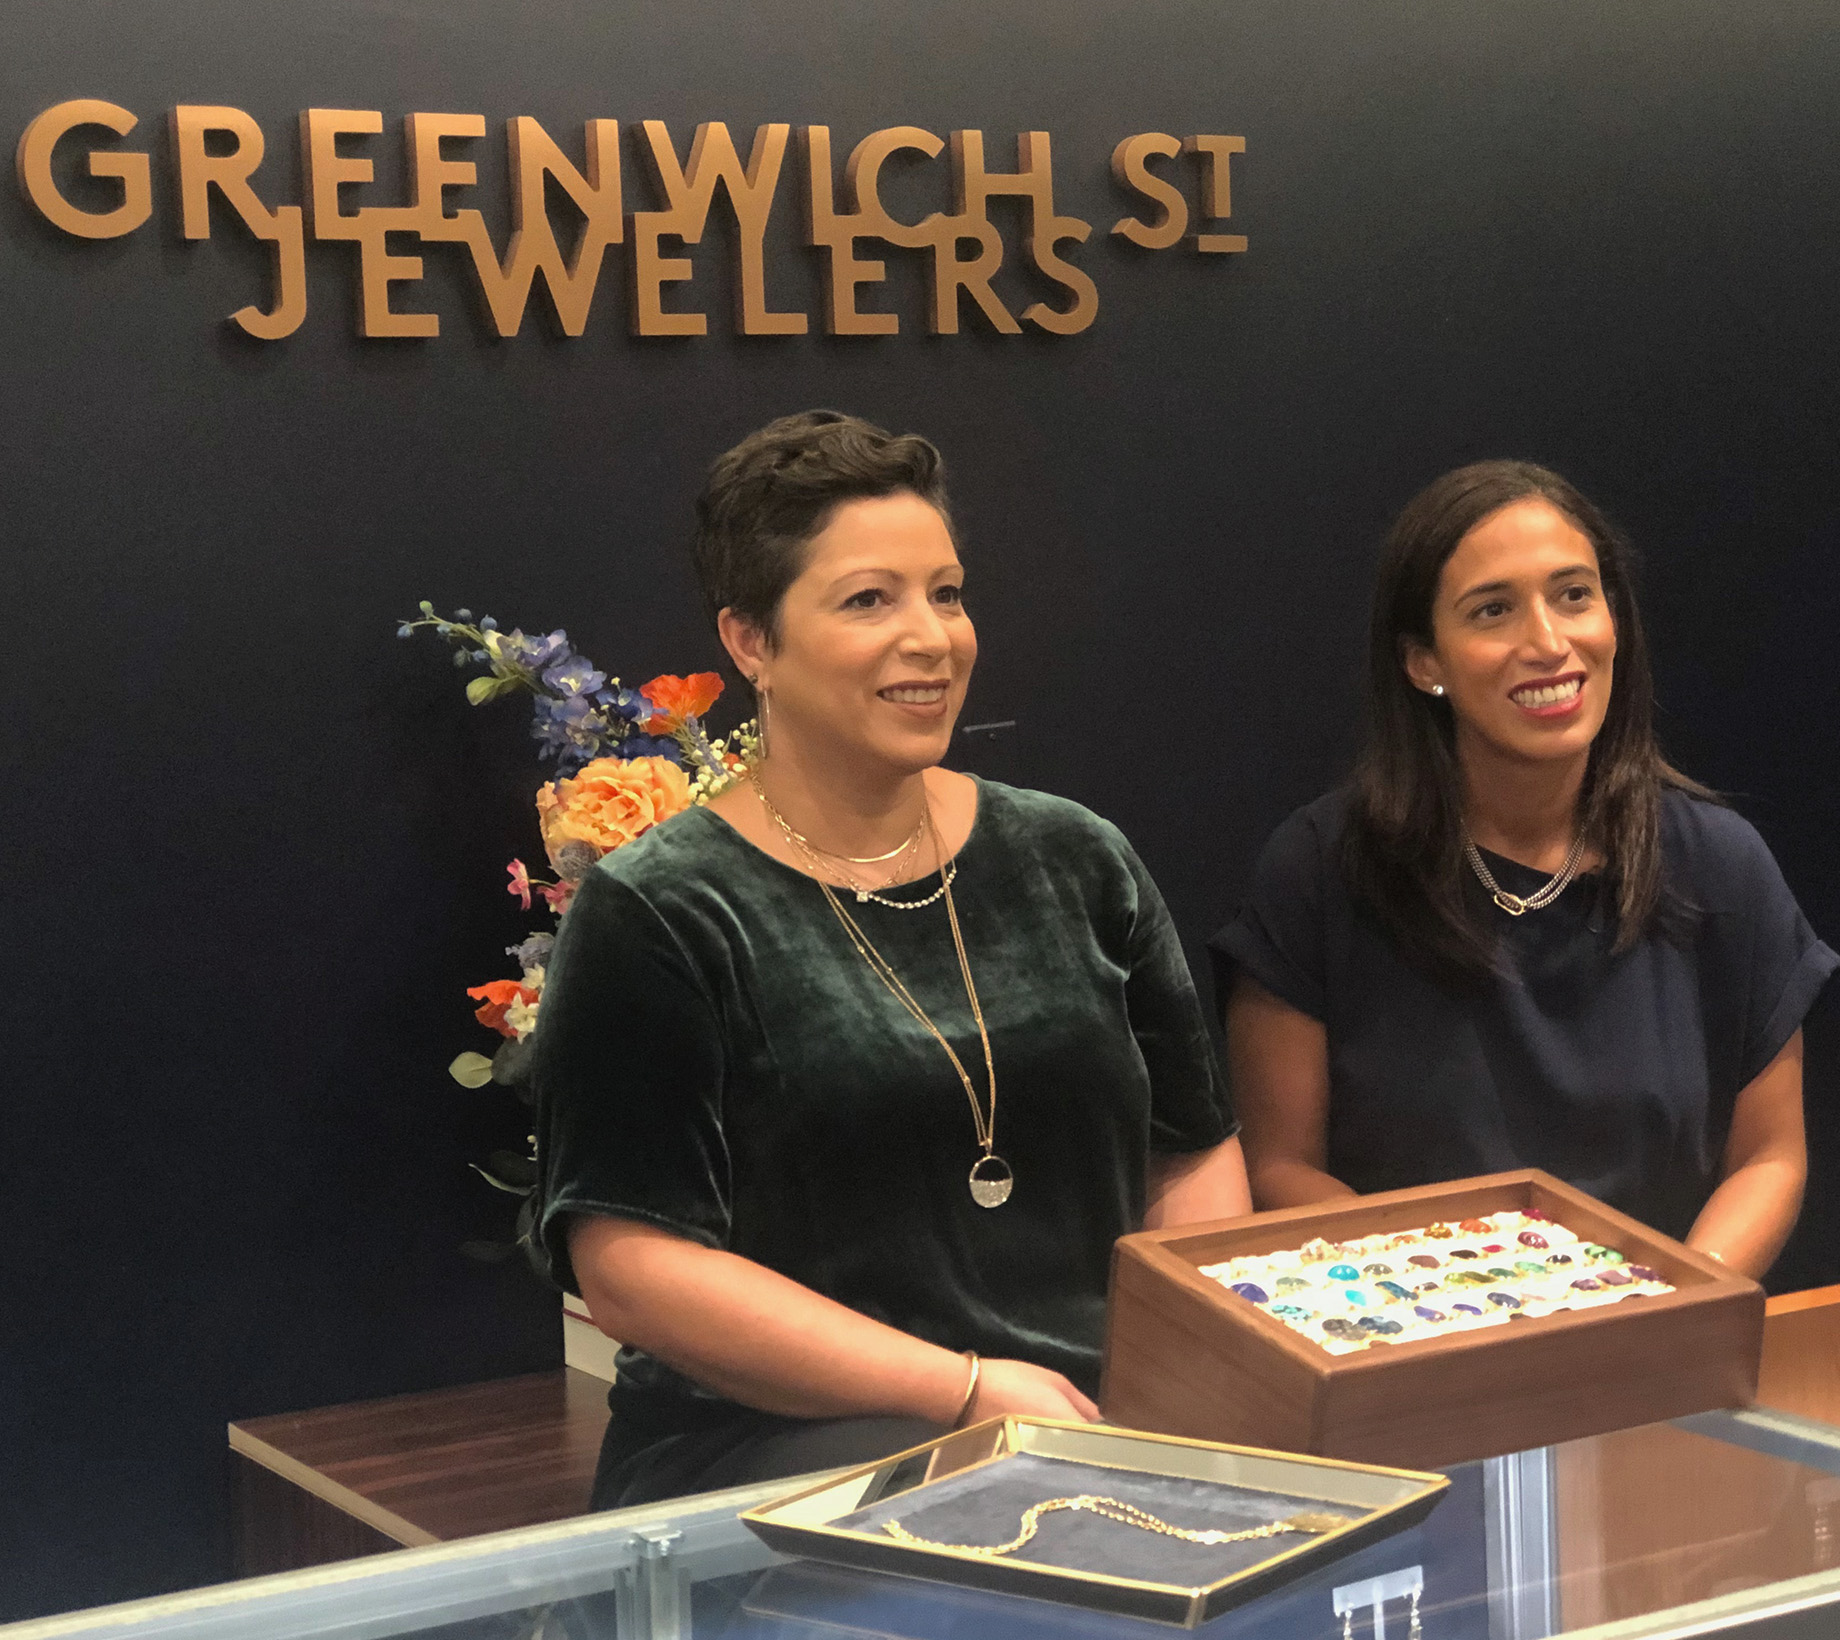 Striking, Sustainable Jewelry Shines At Greenwich St. Jewelers